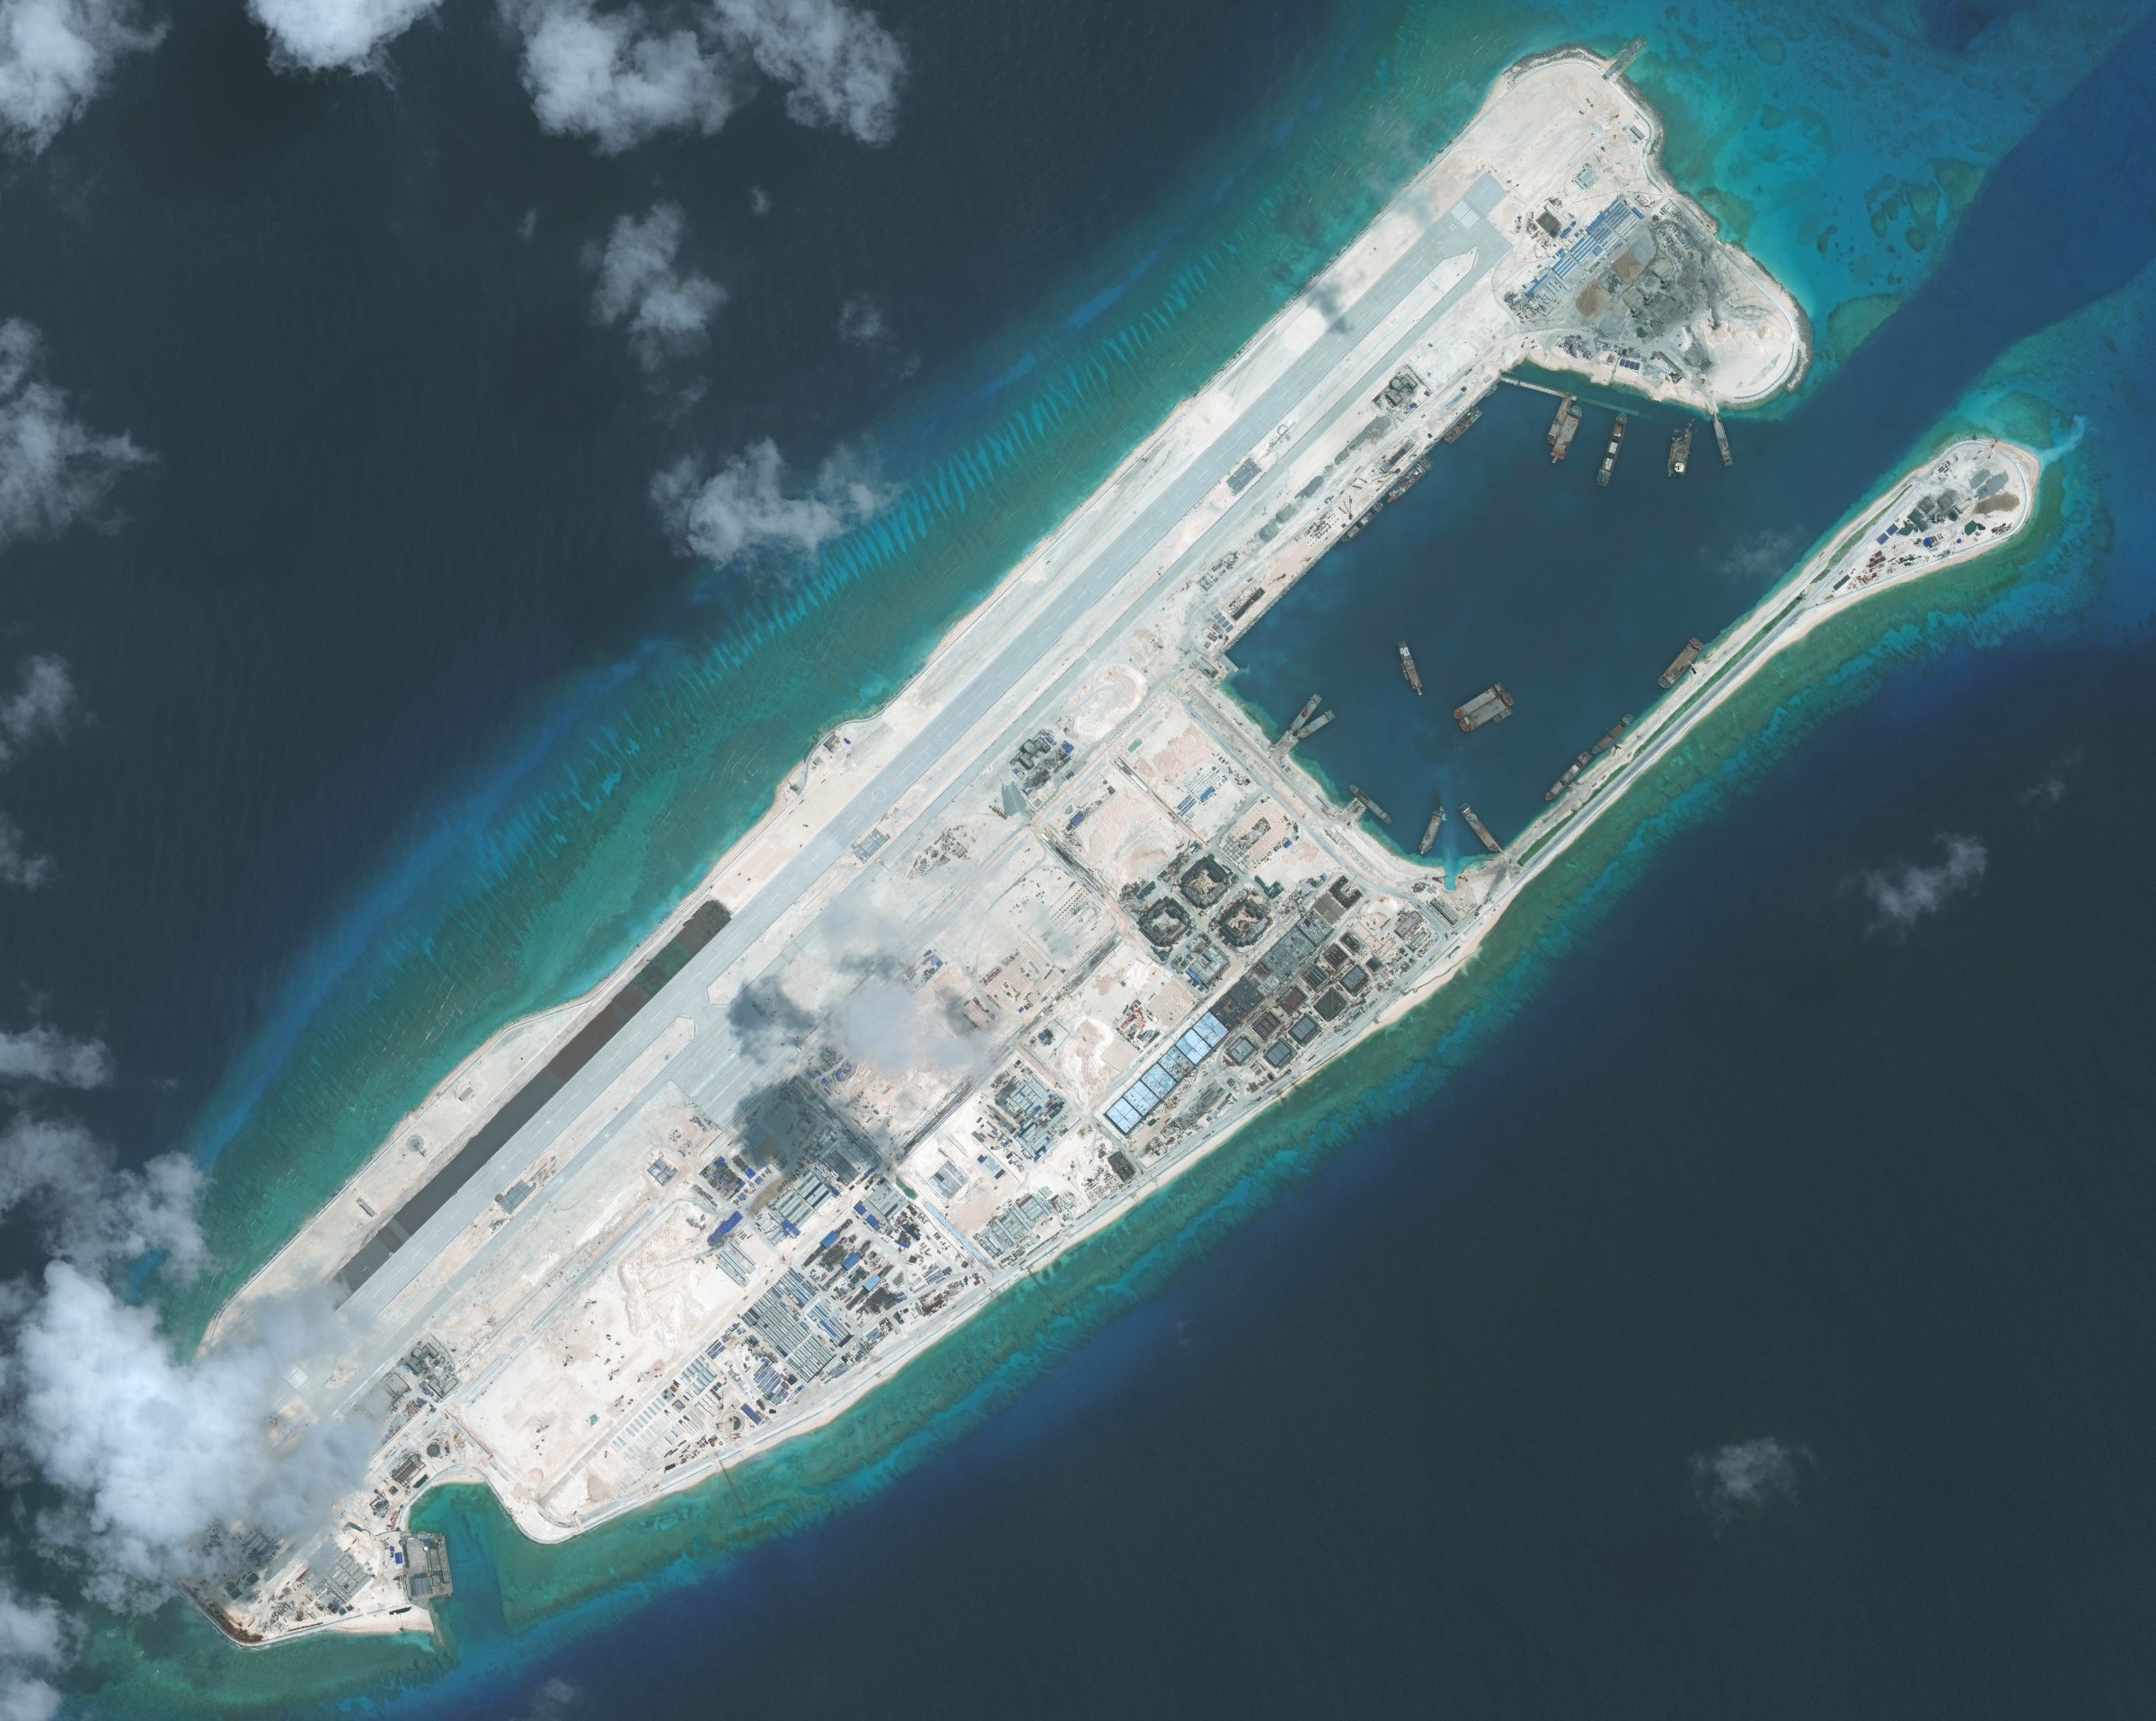 FIERY CROSS REEF, SOUTH CHINA SEA - SEPTEMBER 3, 2015:  DigitalGlobe imagery of the nearly completed construction within the Fiery Cross Reef located in the South China Sea. Fiery Cross is located in the western part of the Spratly Islands group.  Photo DigitalGlobe via Getty Images.